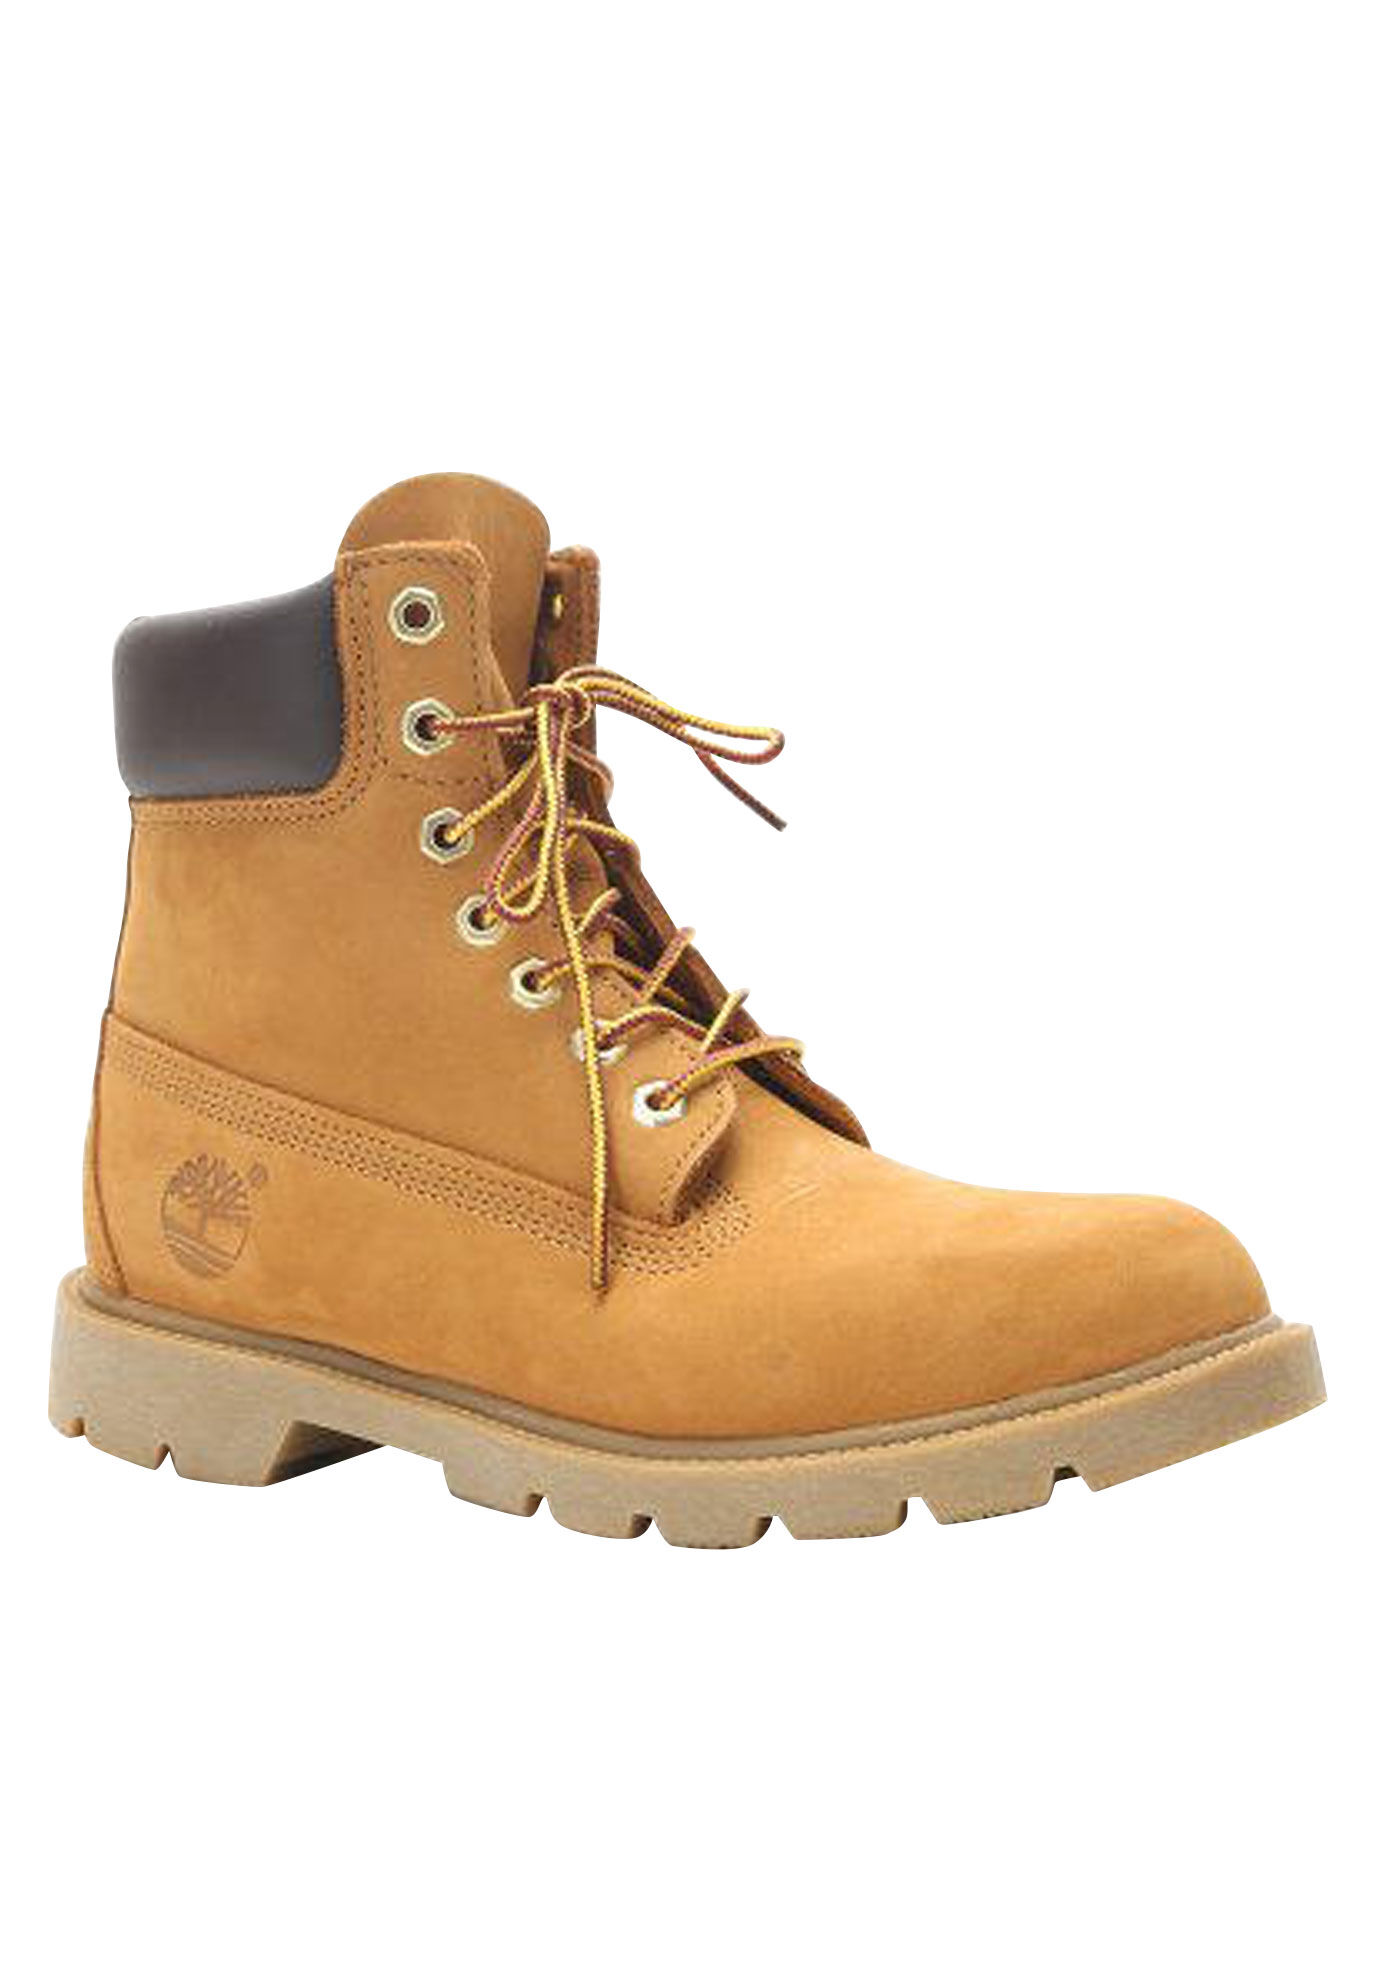 Big \u0026 Tall by Timberland Brand for Men 